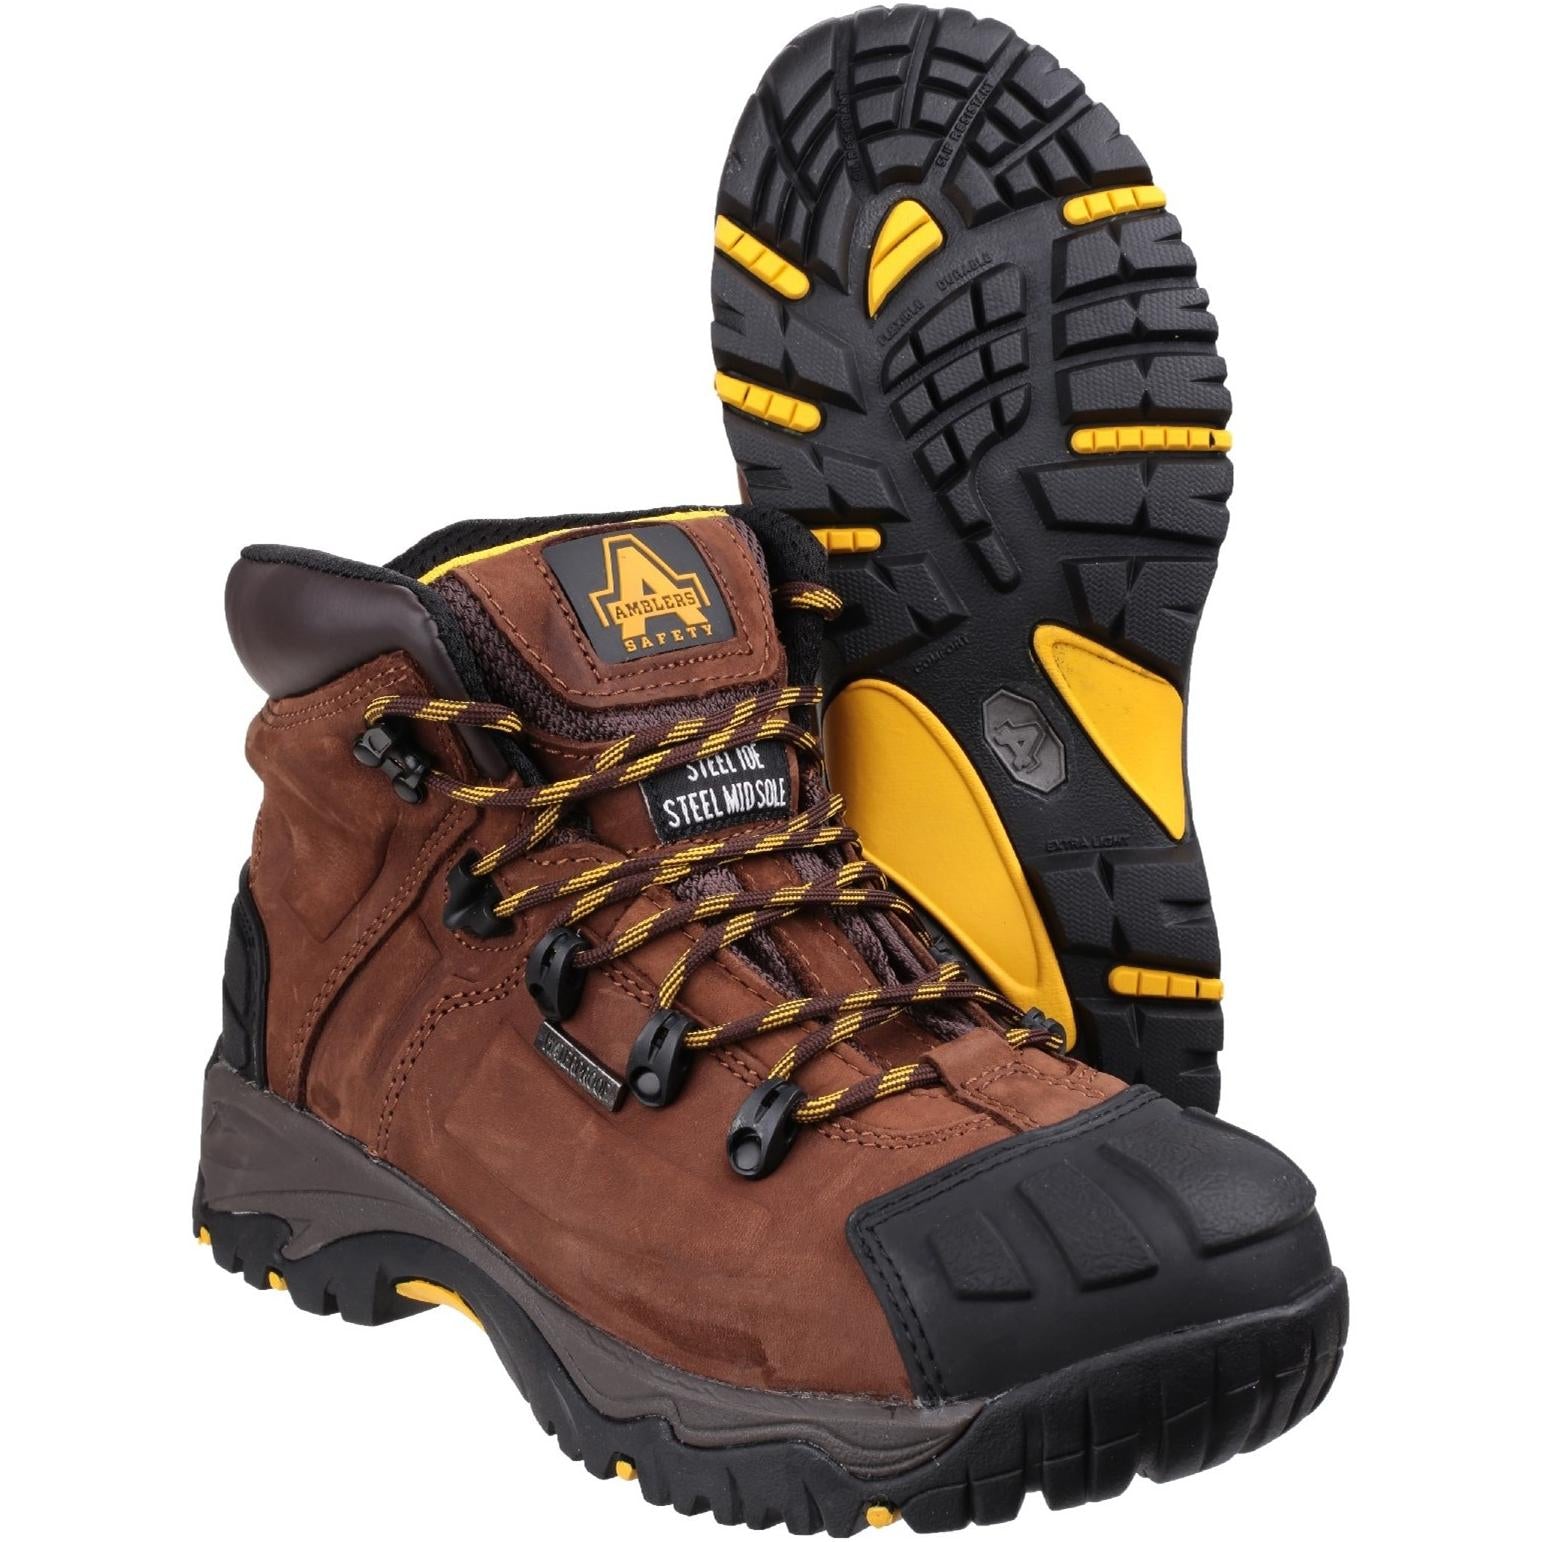 Amblers Safety FS39 Safety Boot